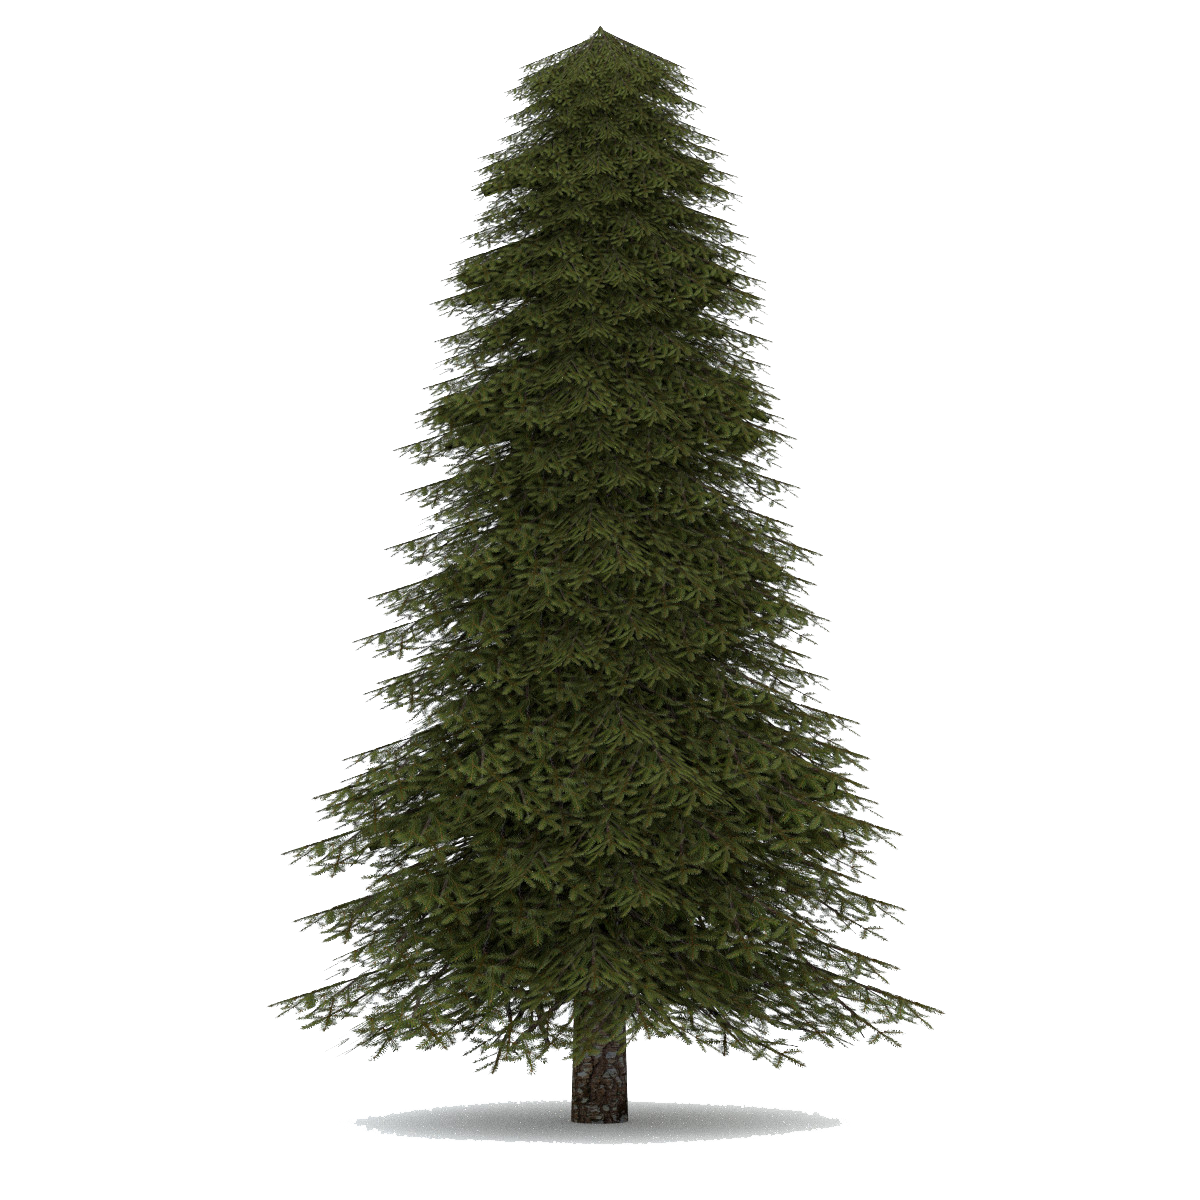 Fir-Tree PNG Image | PNG All